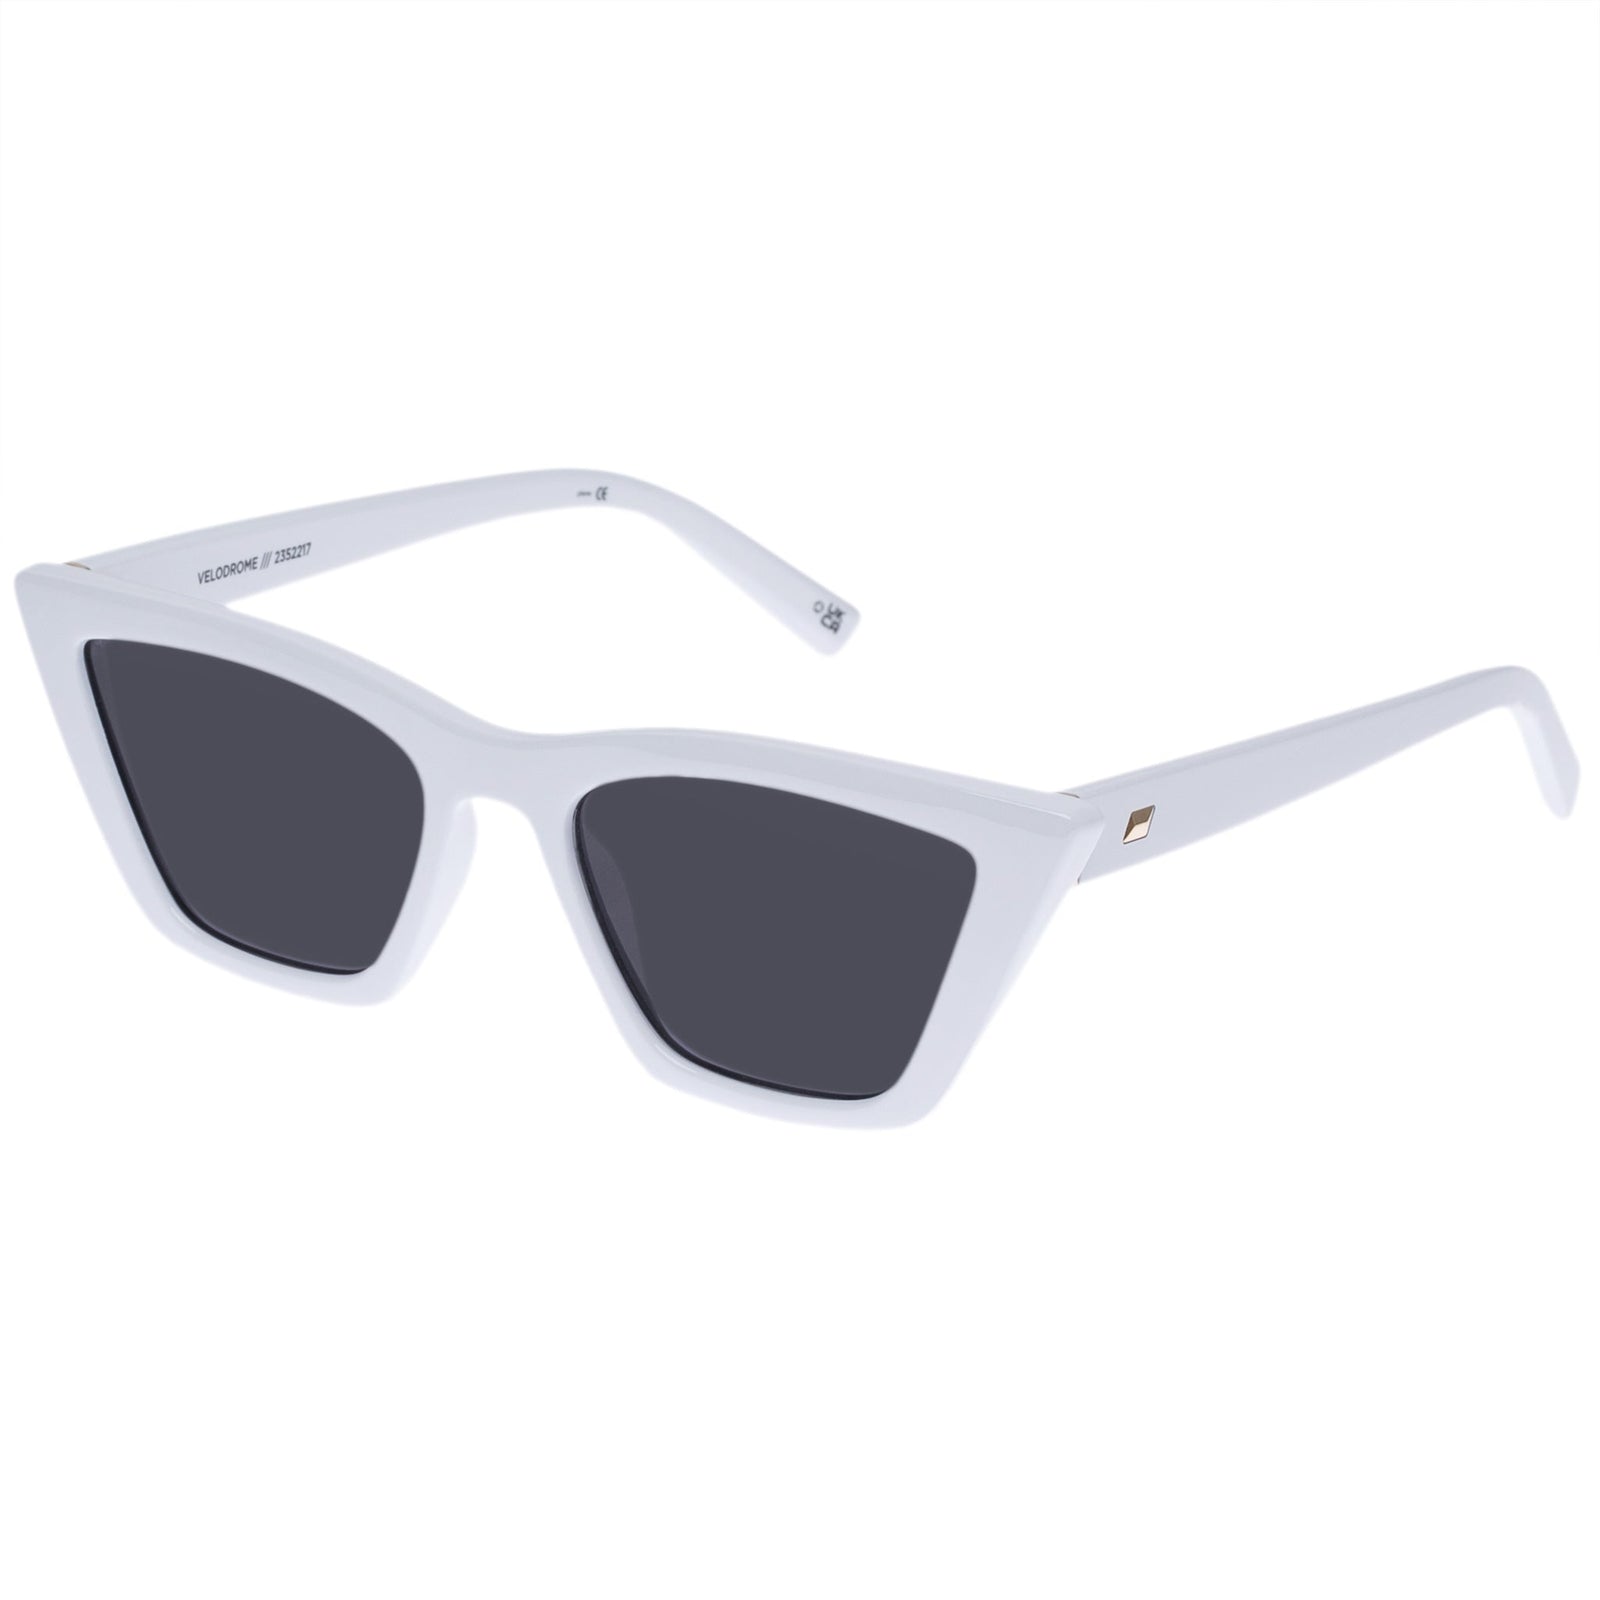 mng sunglasses products for sale | eBay